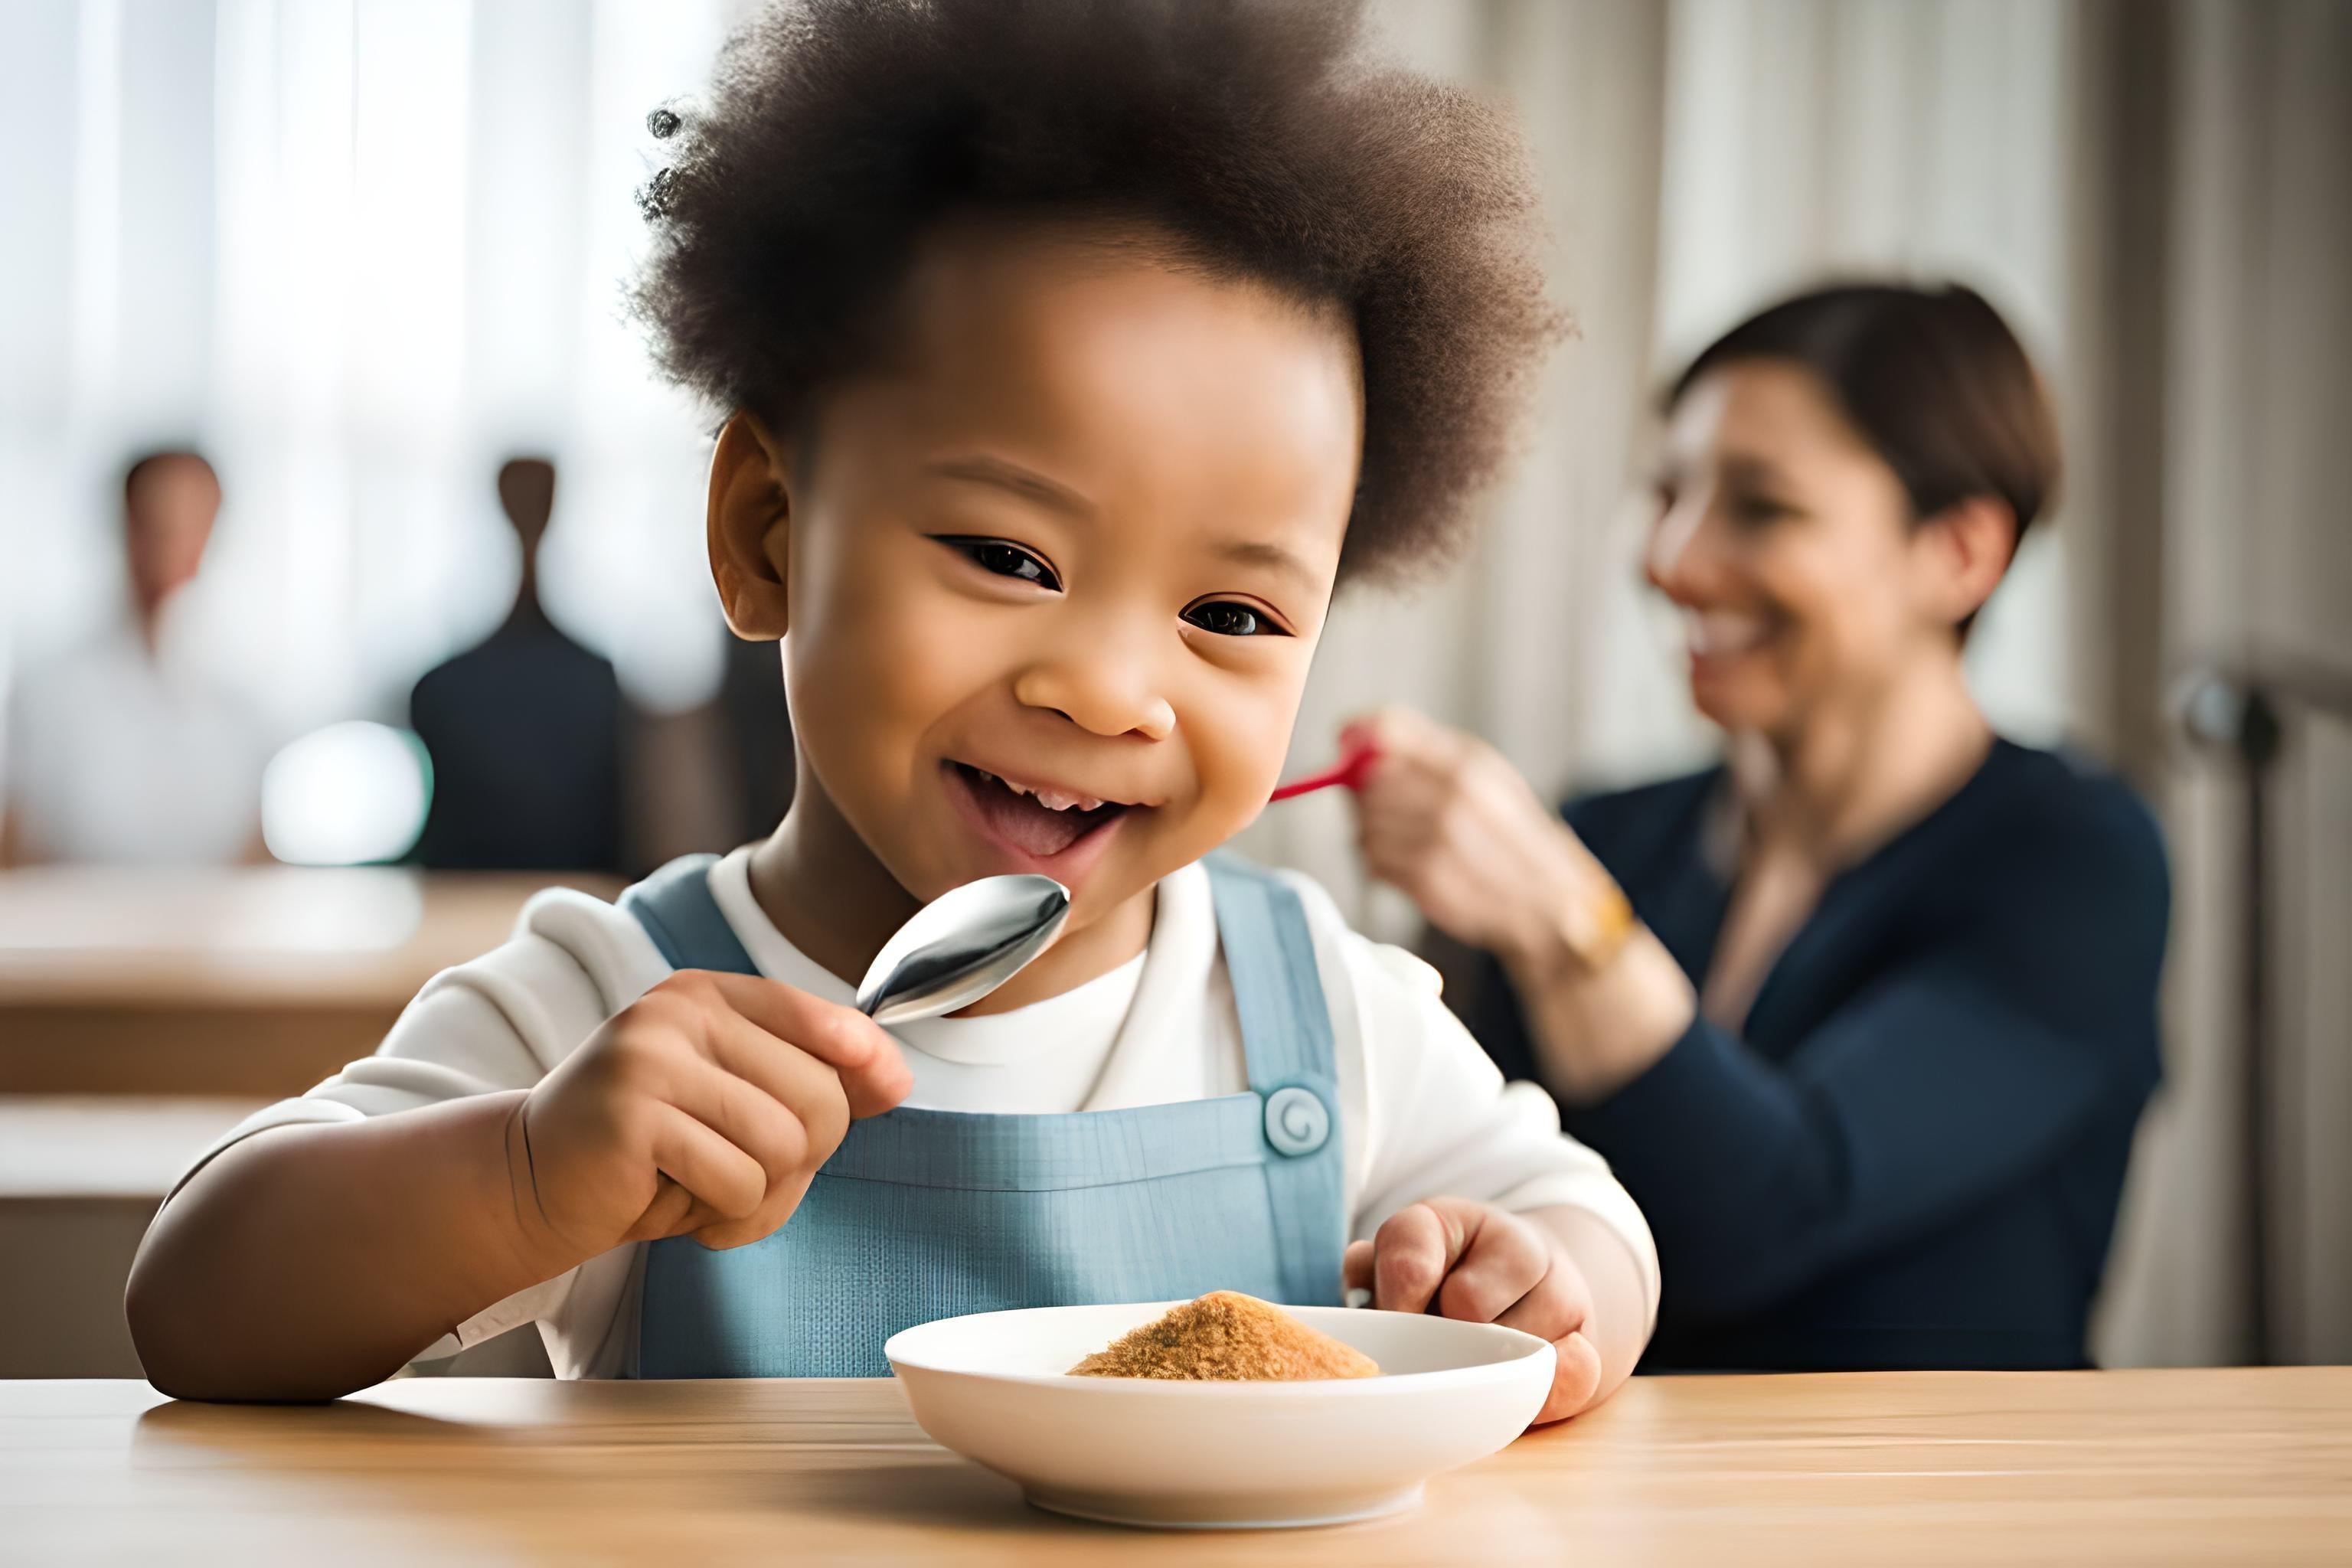 Healthy Eating Habits for Kids: Tips and Tools for Nourishing Children - 4aKid